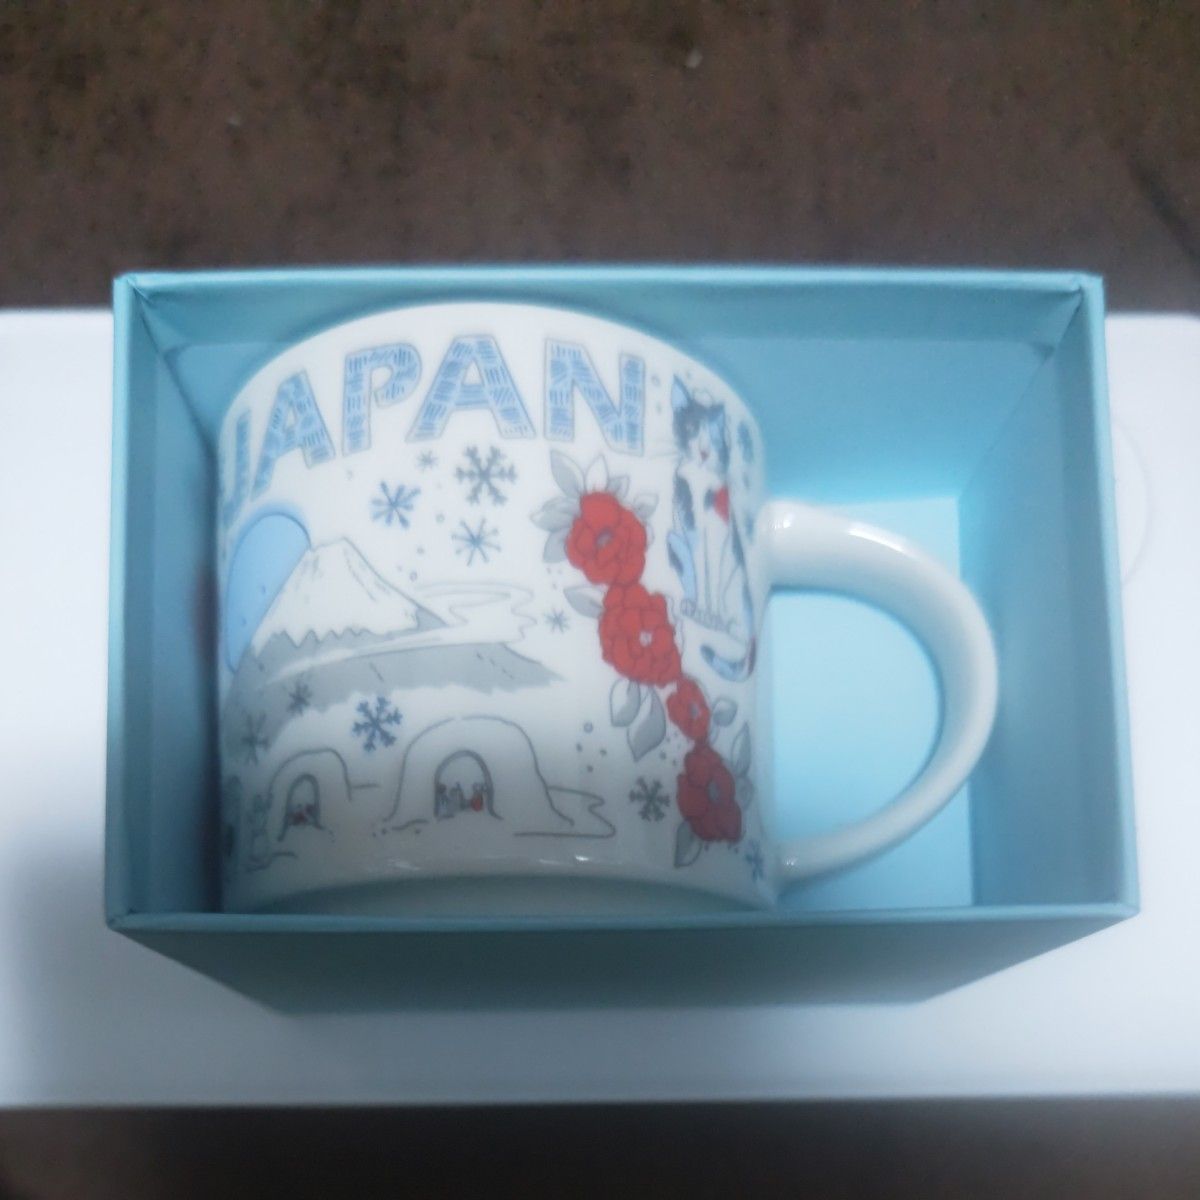 Been There Series　マグ　JAPAN ウィンター　414ml　スターバックス